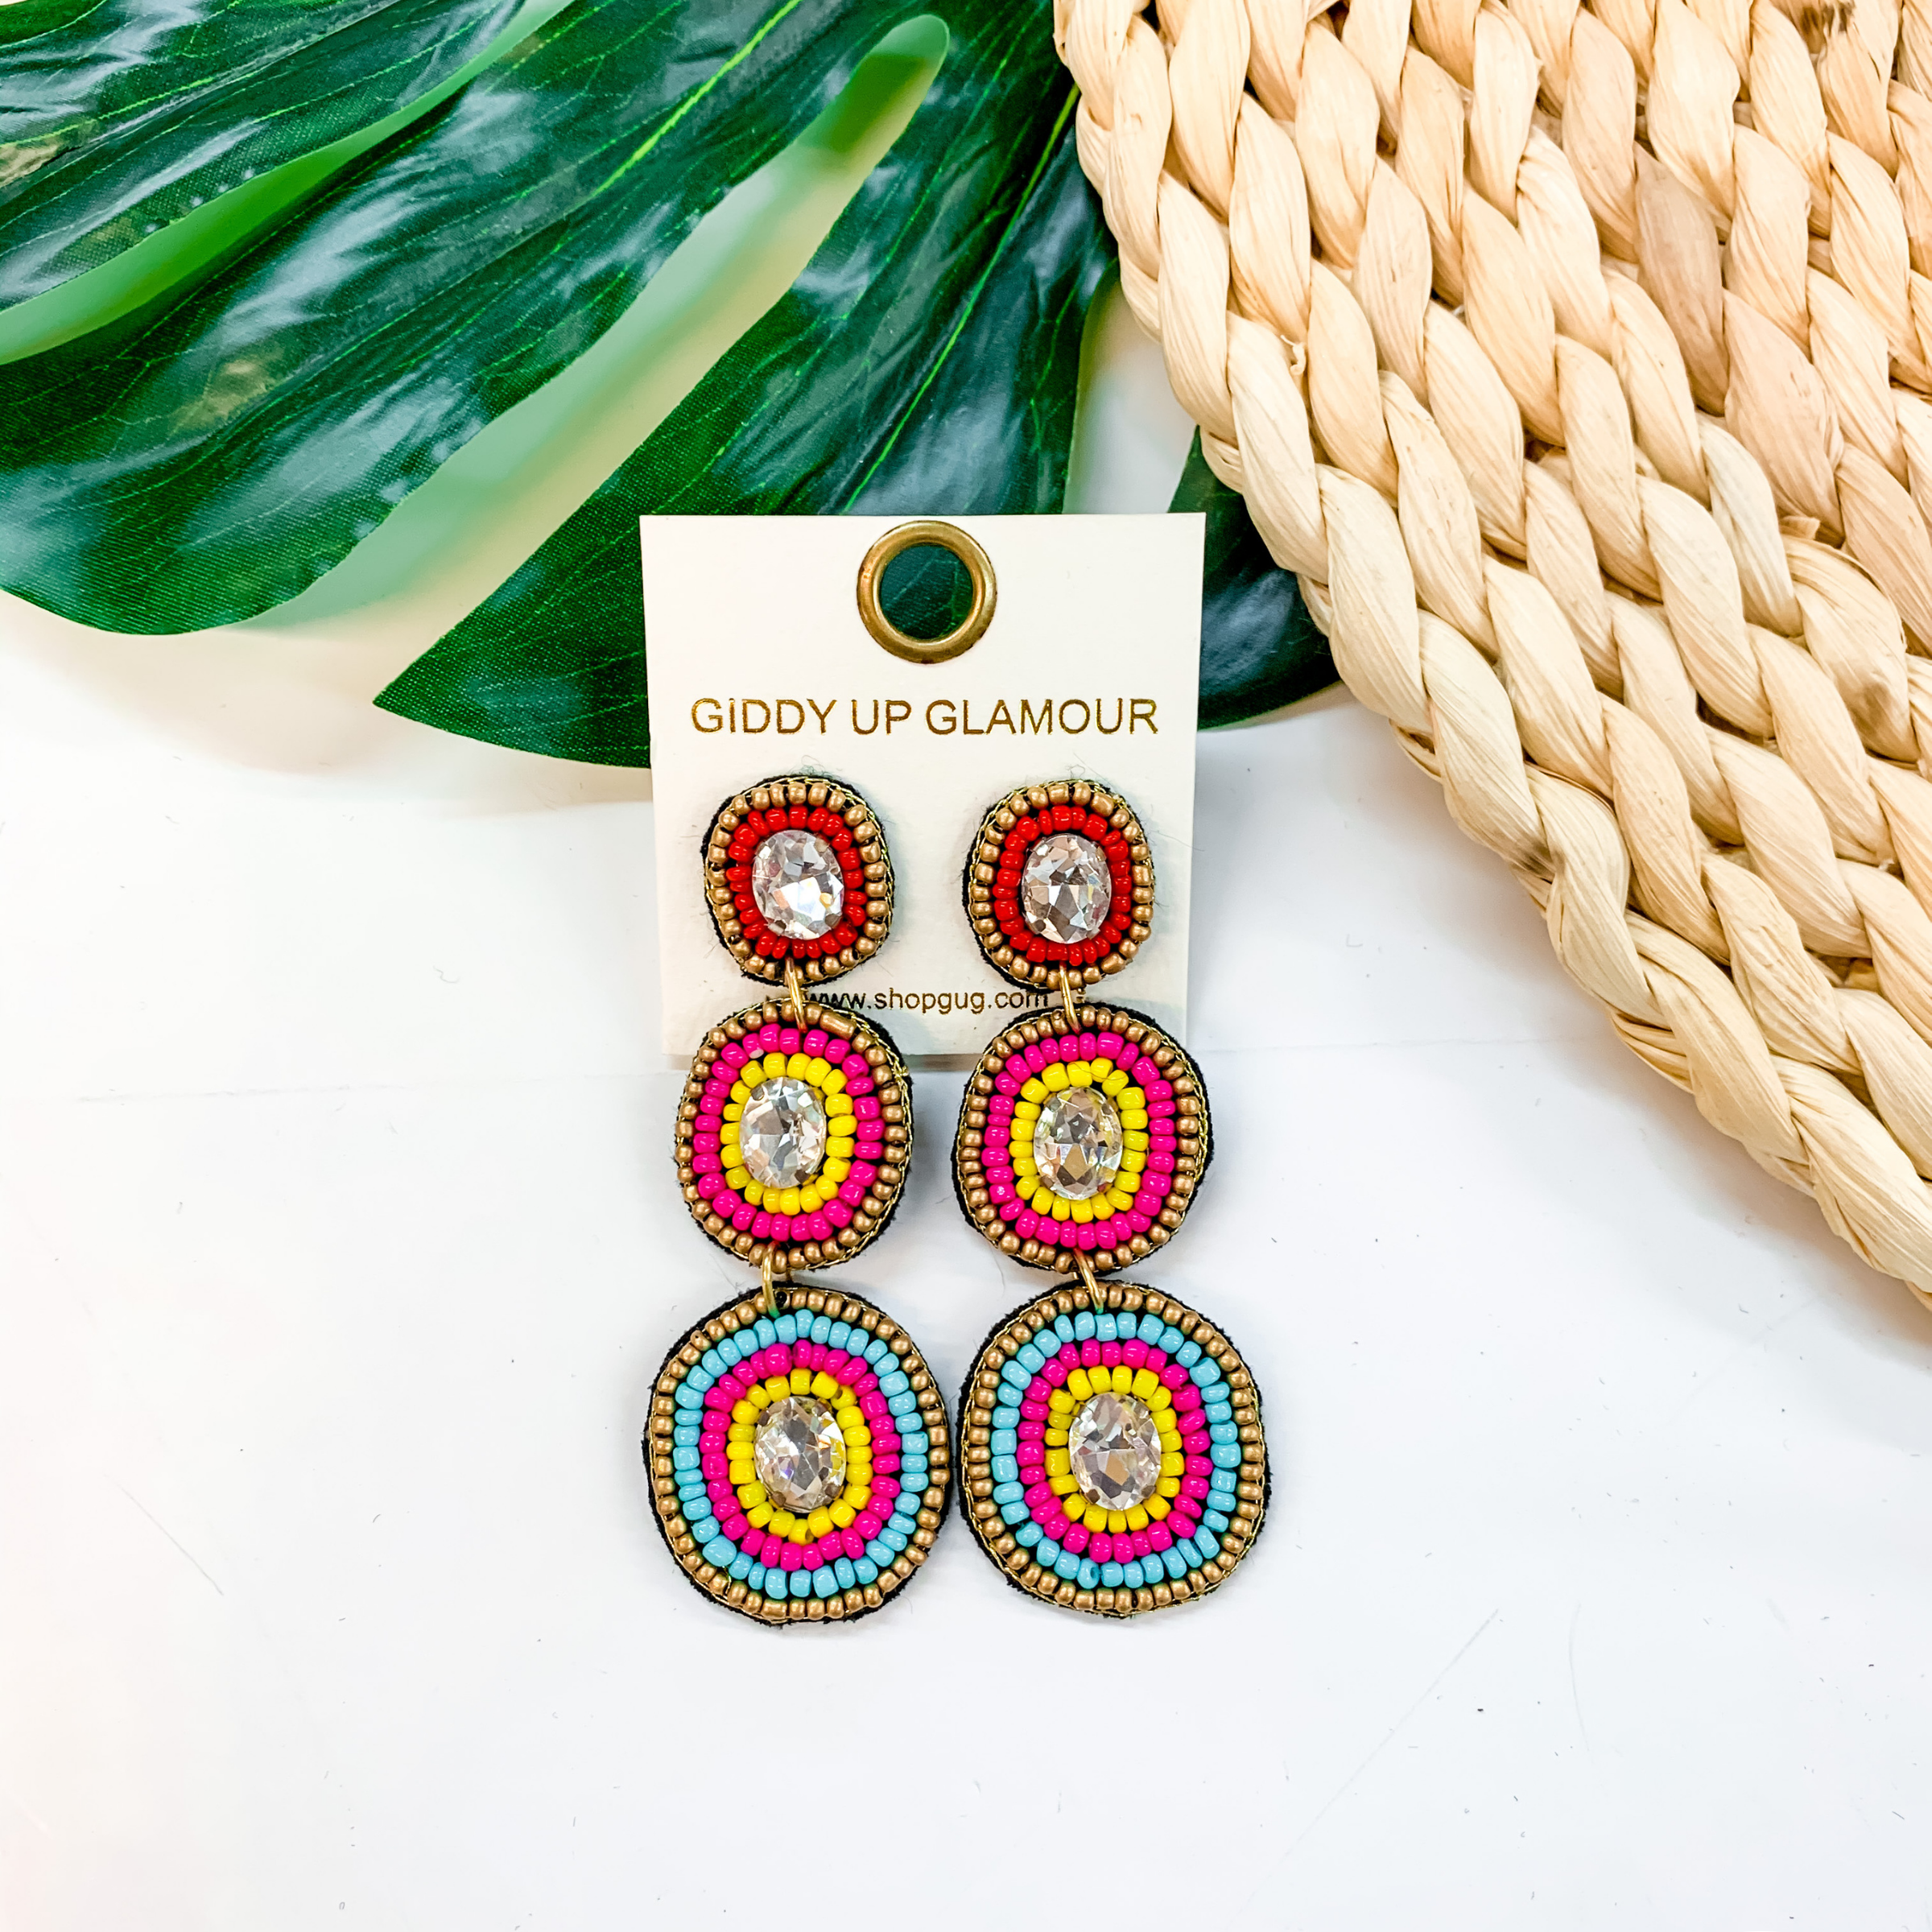 Seed Bead Drop Earrings With Glass Stone in Red, Fuchsia, Yellow, and Turquoise - Giddy Up Glamour Boutique